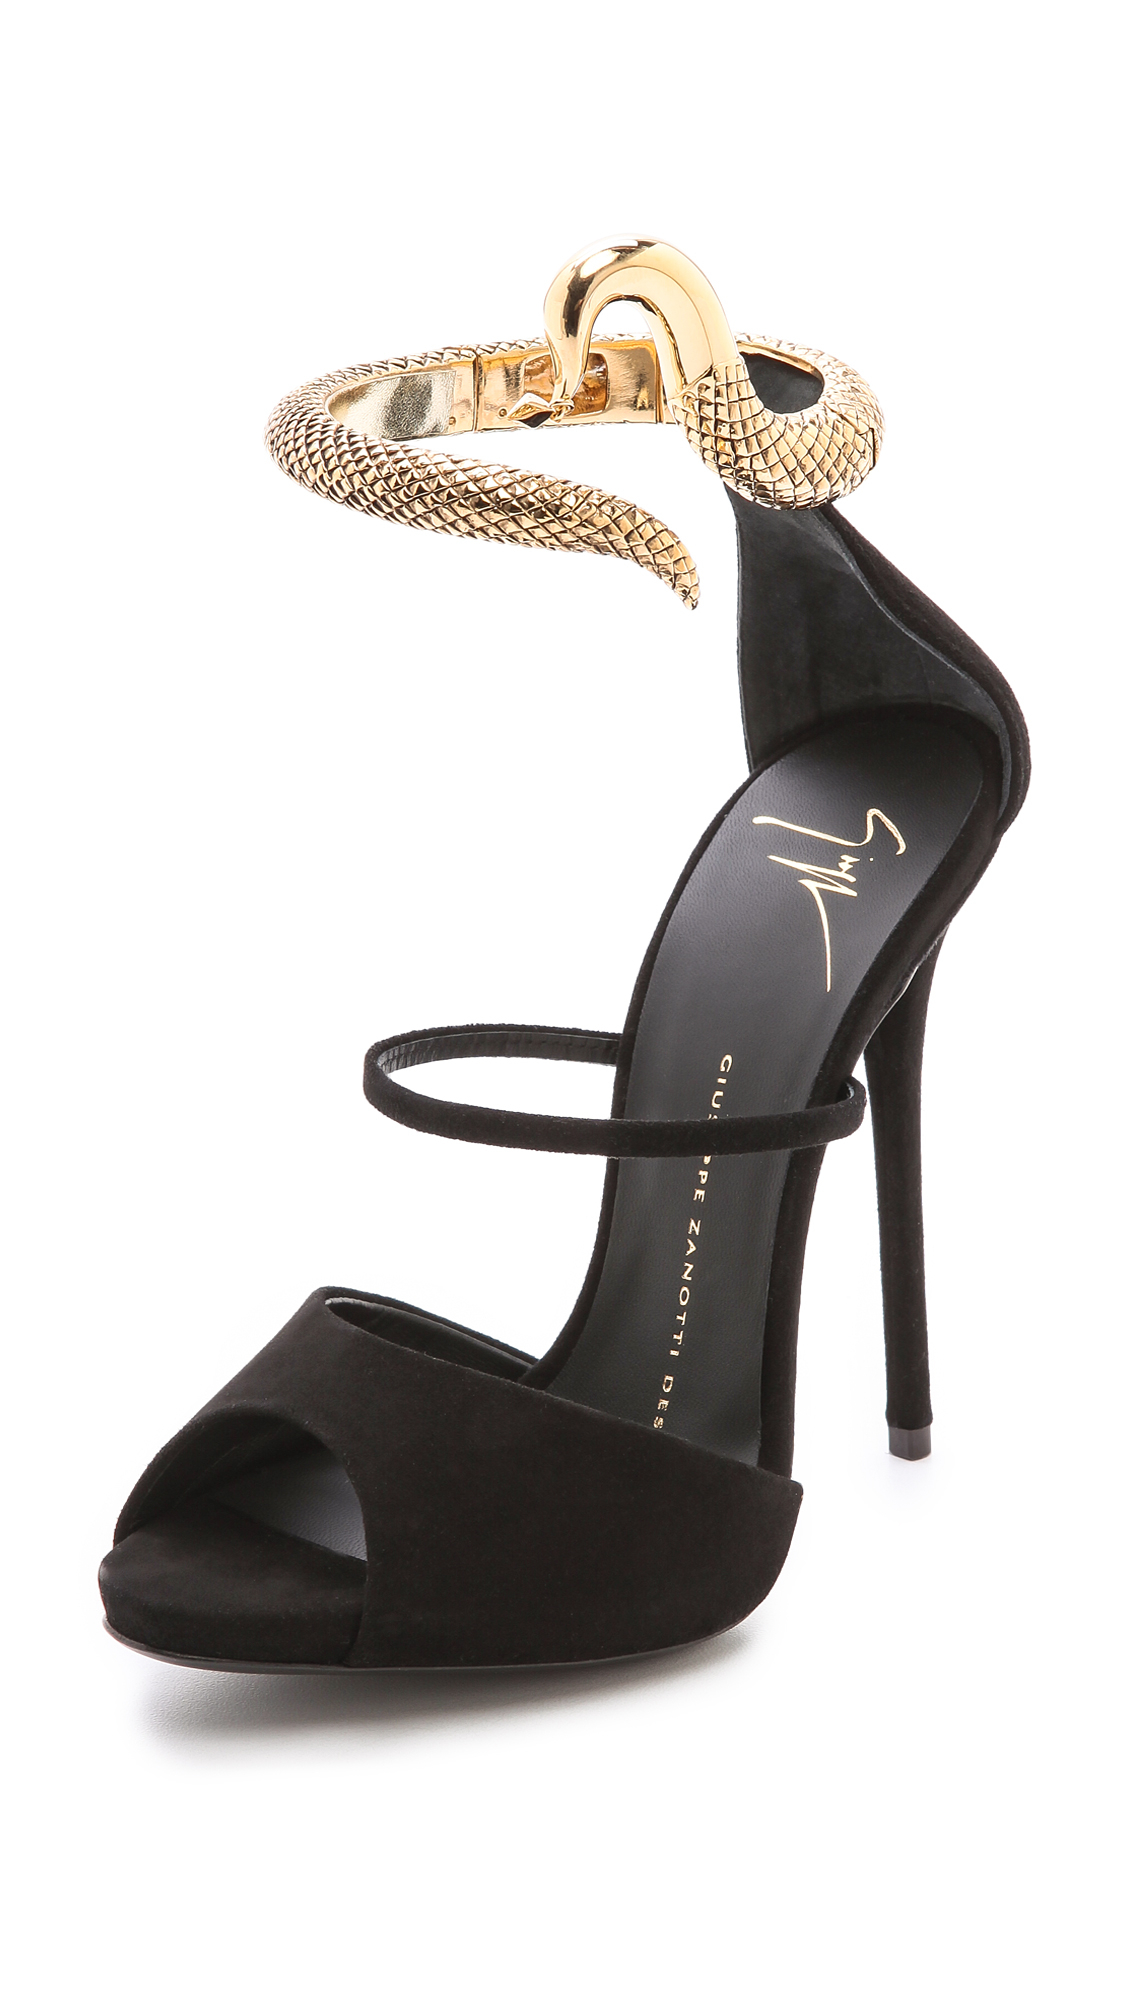 Suede High-heels Shoes Giuseppe Zanotti - 37, buy pre-owned at 160 EUR